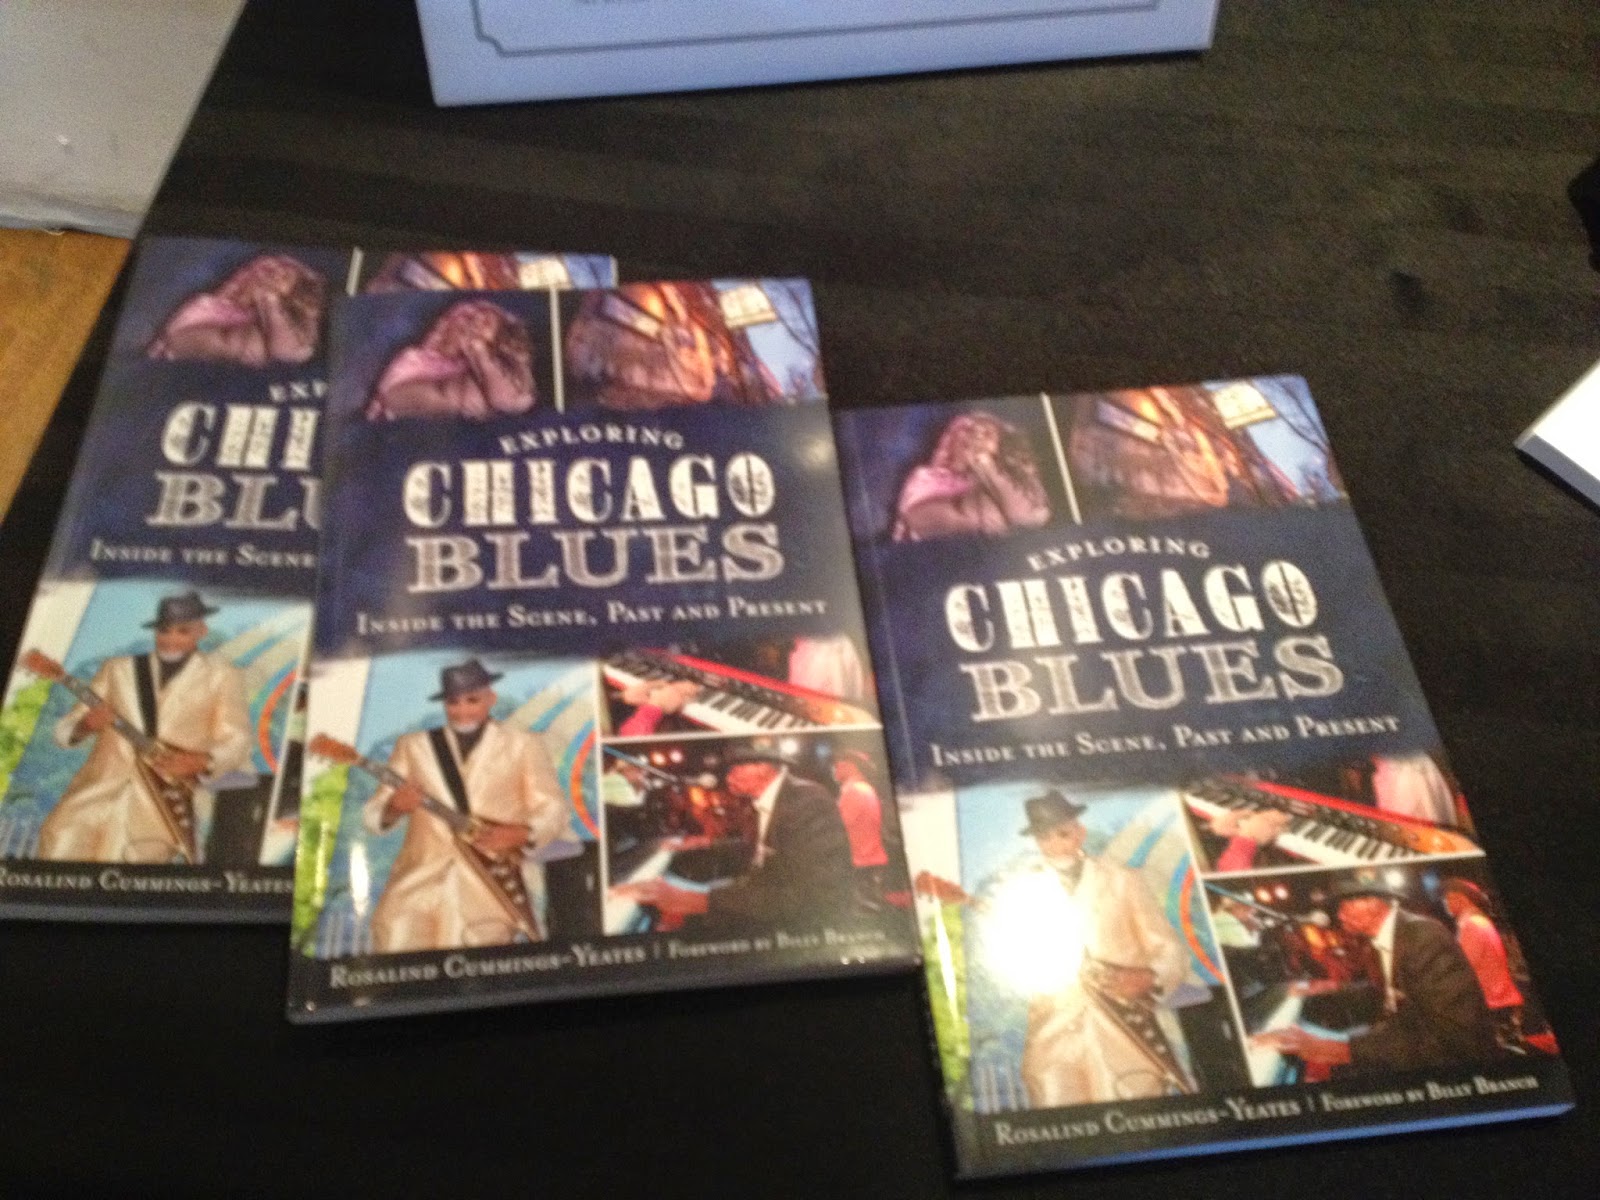 Exploring Chicago Blues Inside The Scene, Past and Present